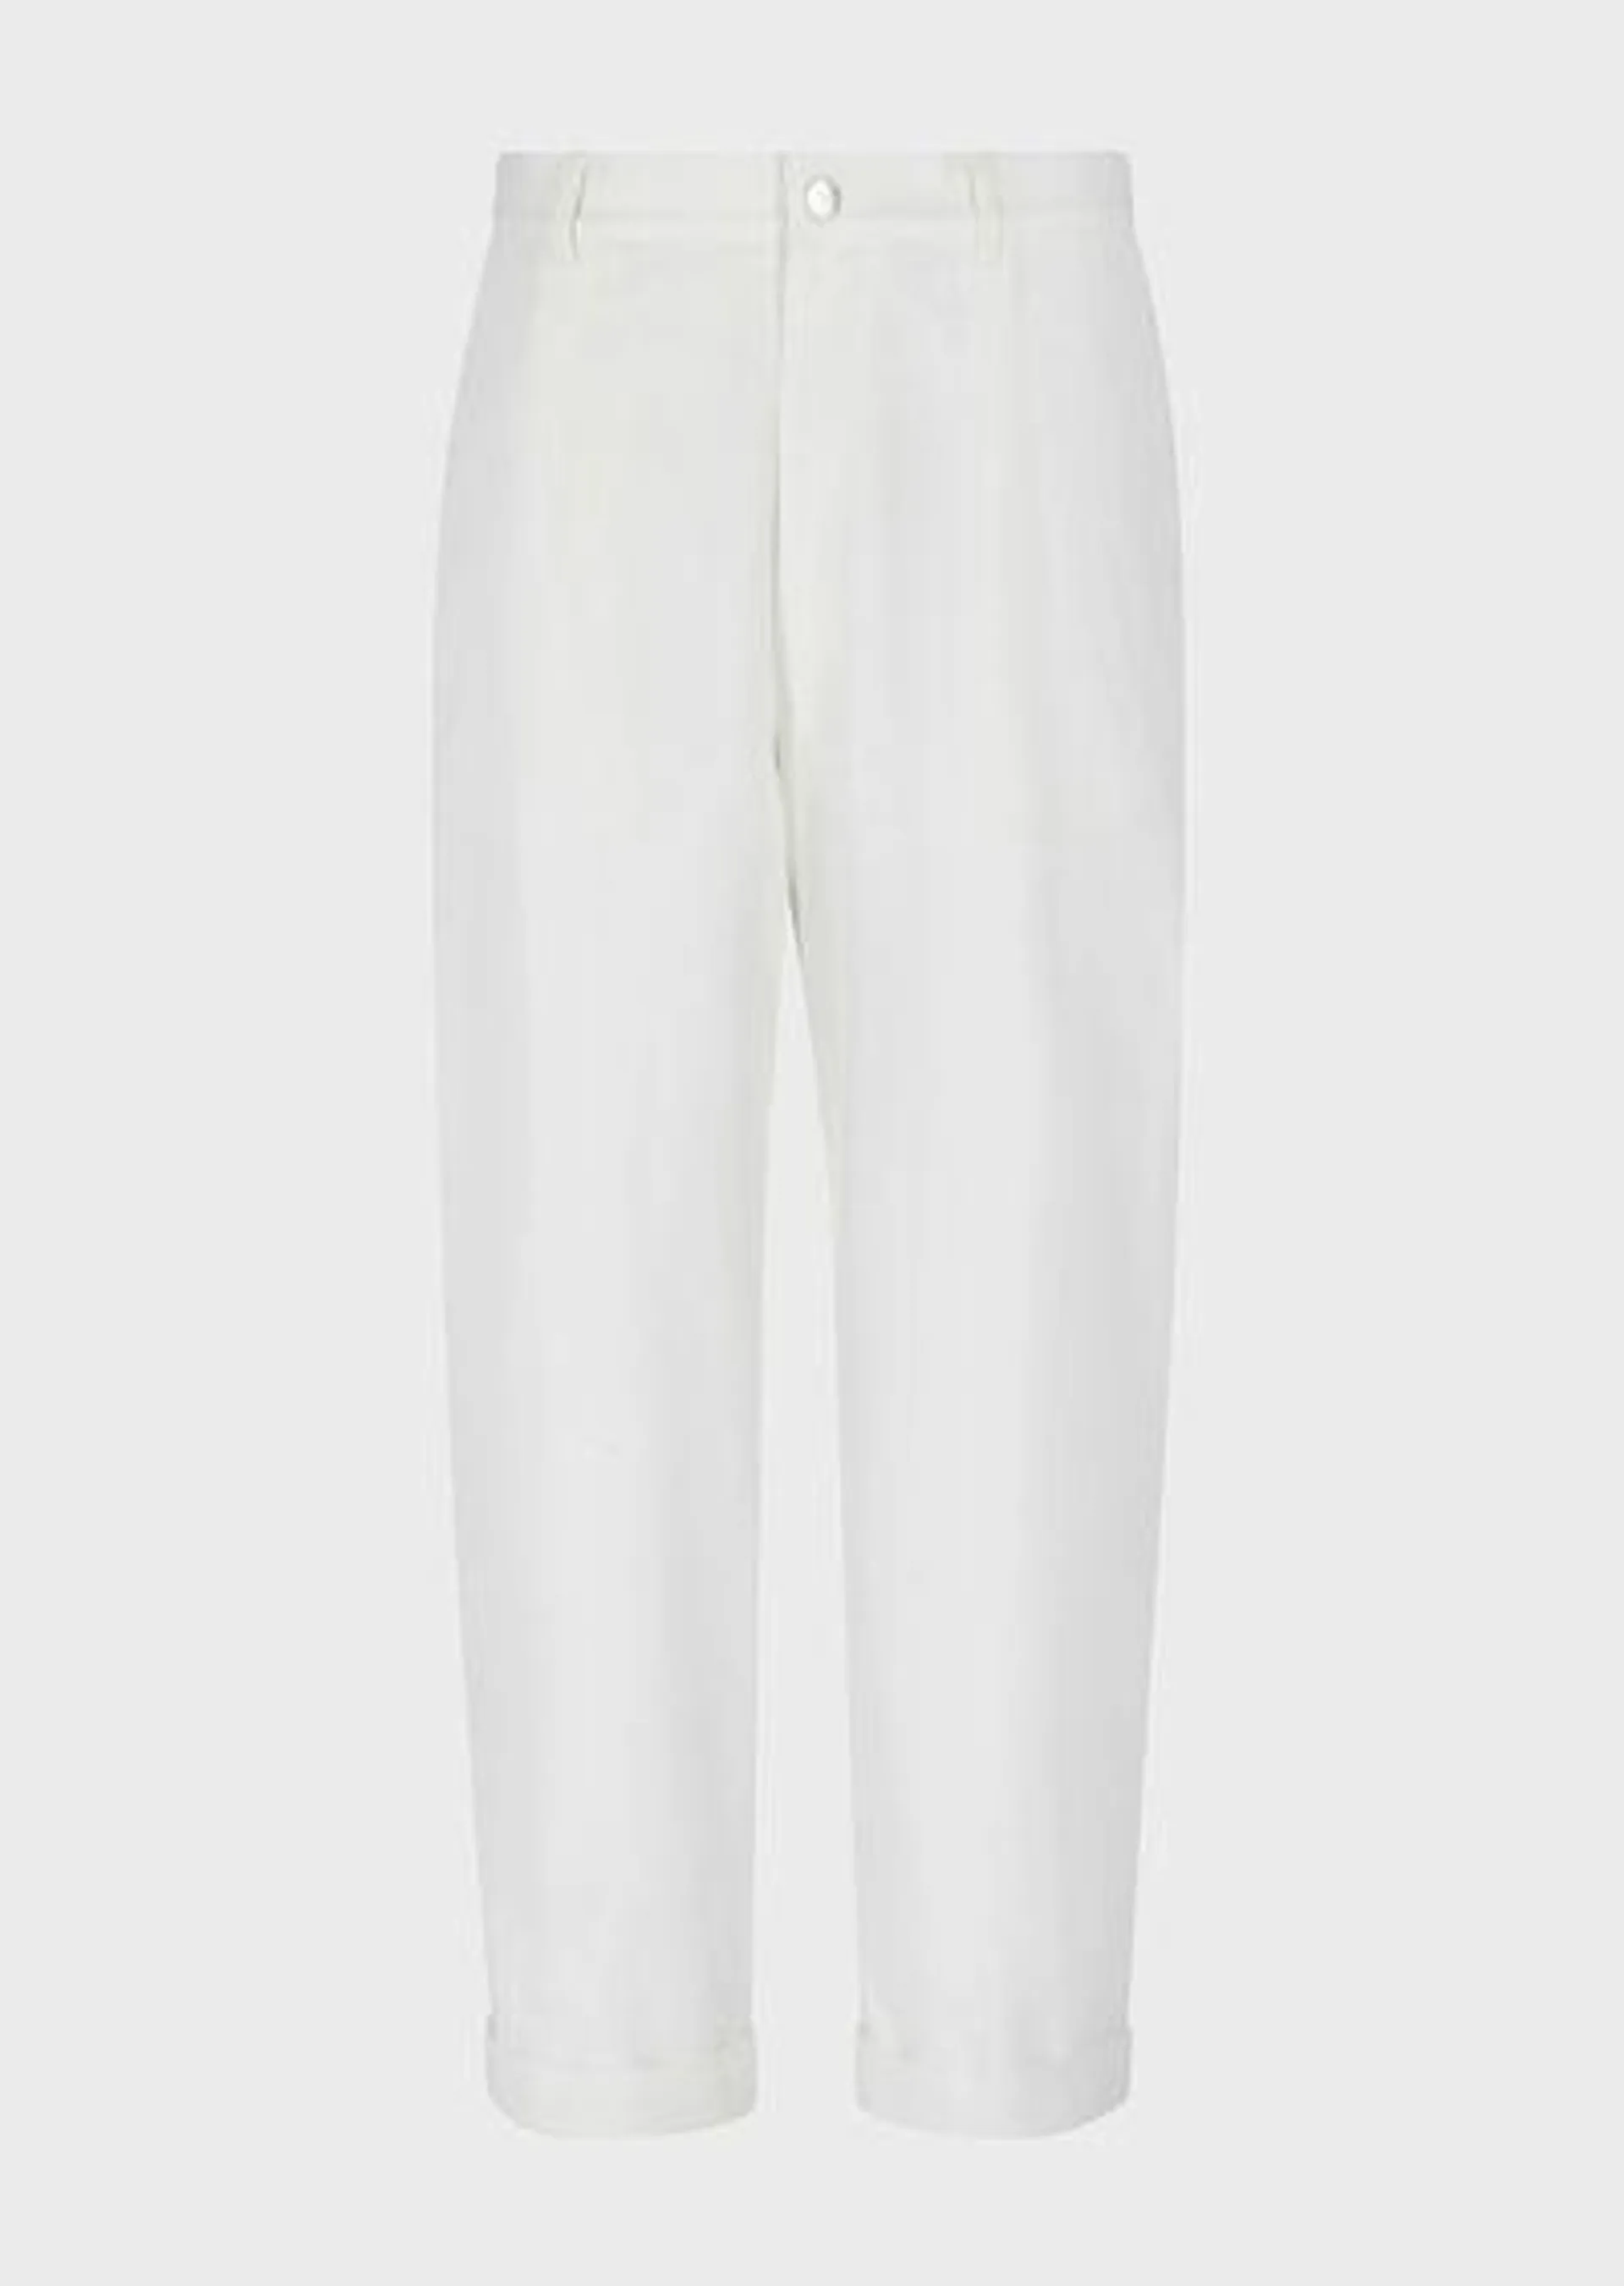 Denim Collection stretch-cotton one-dart trousers